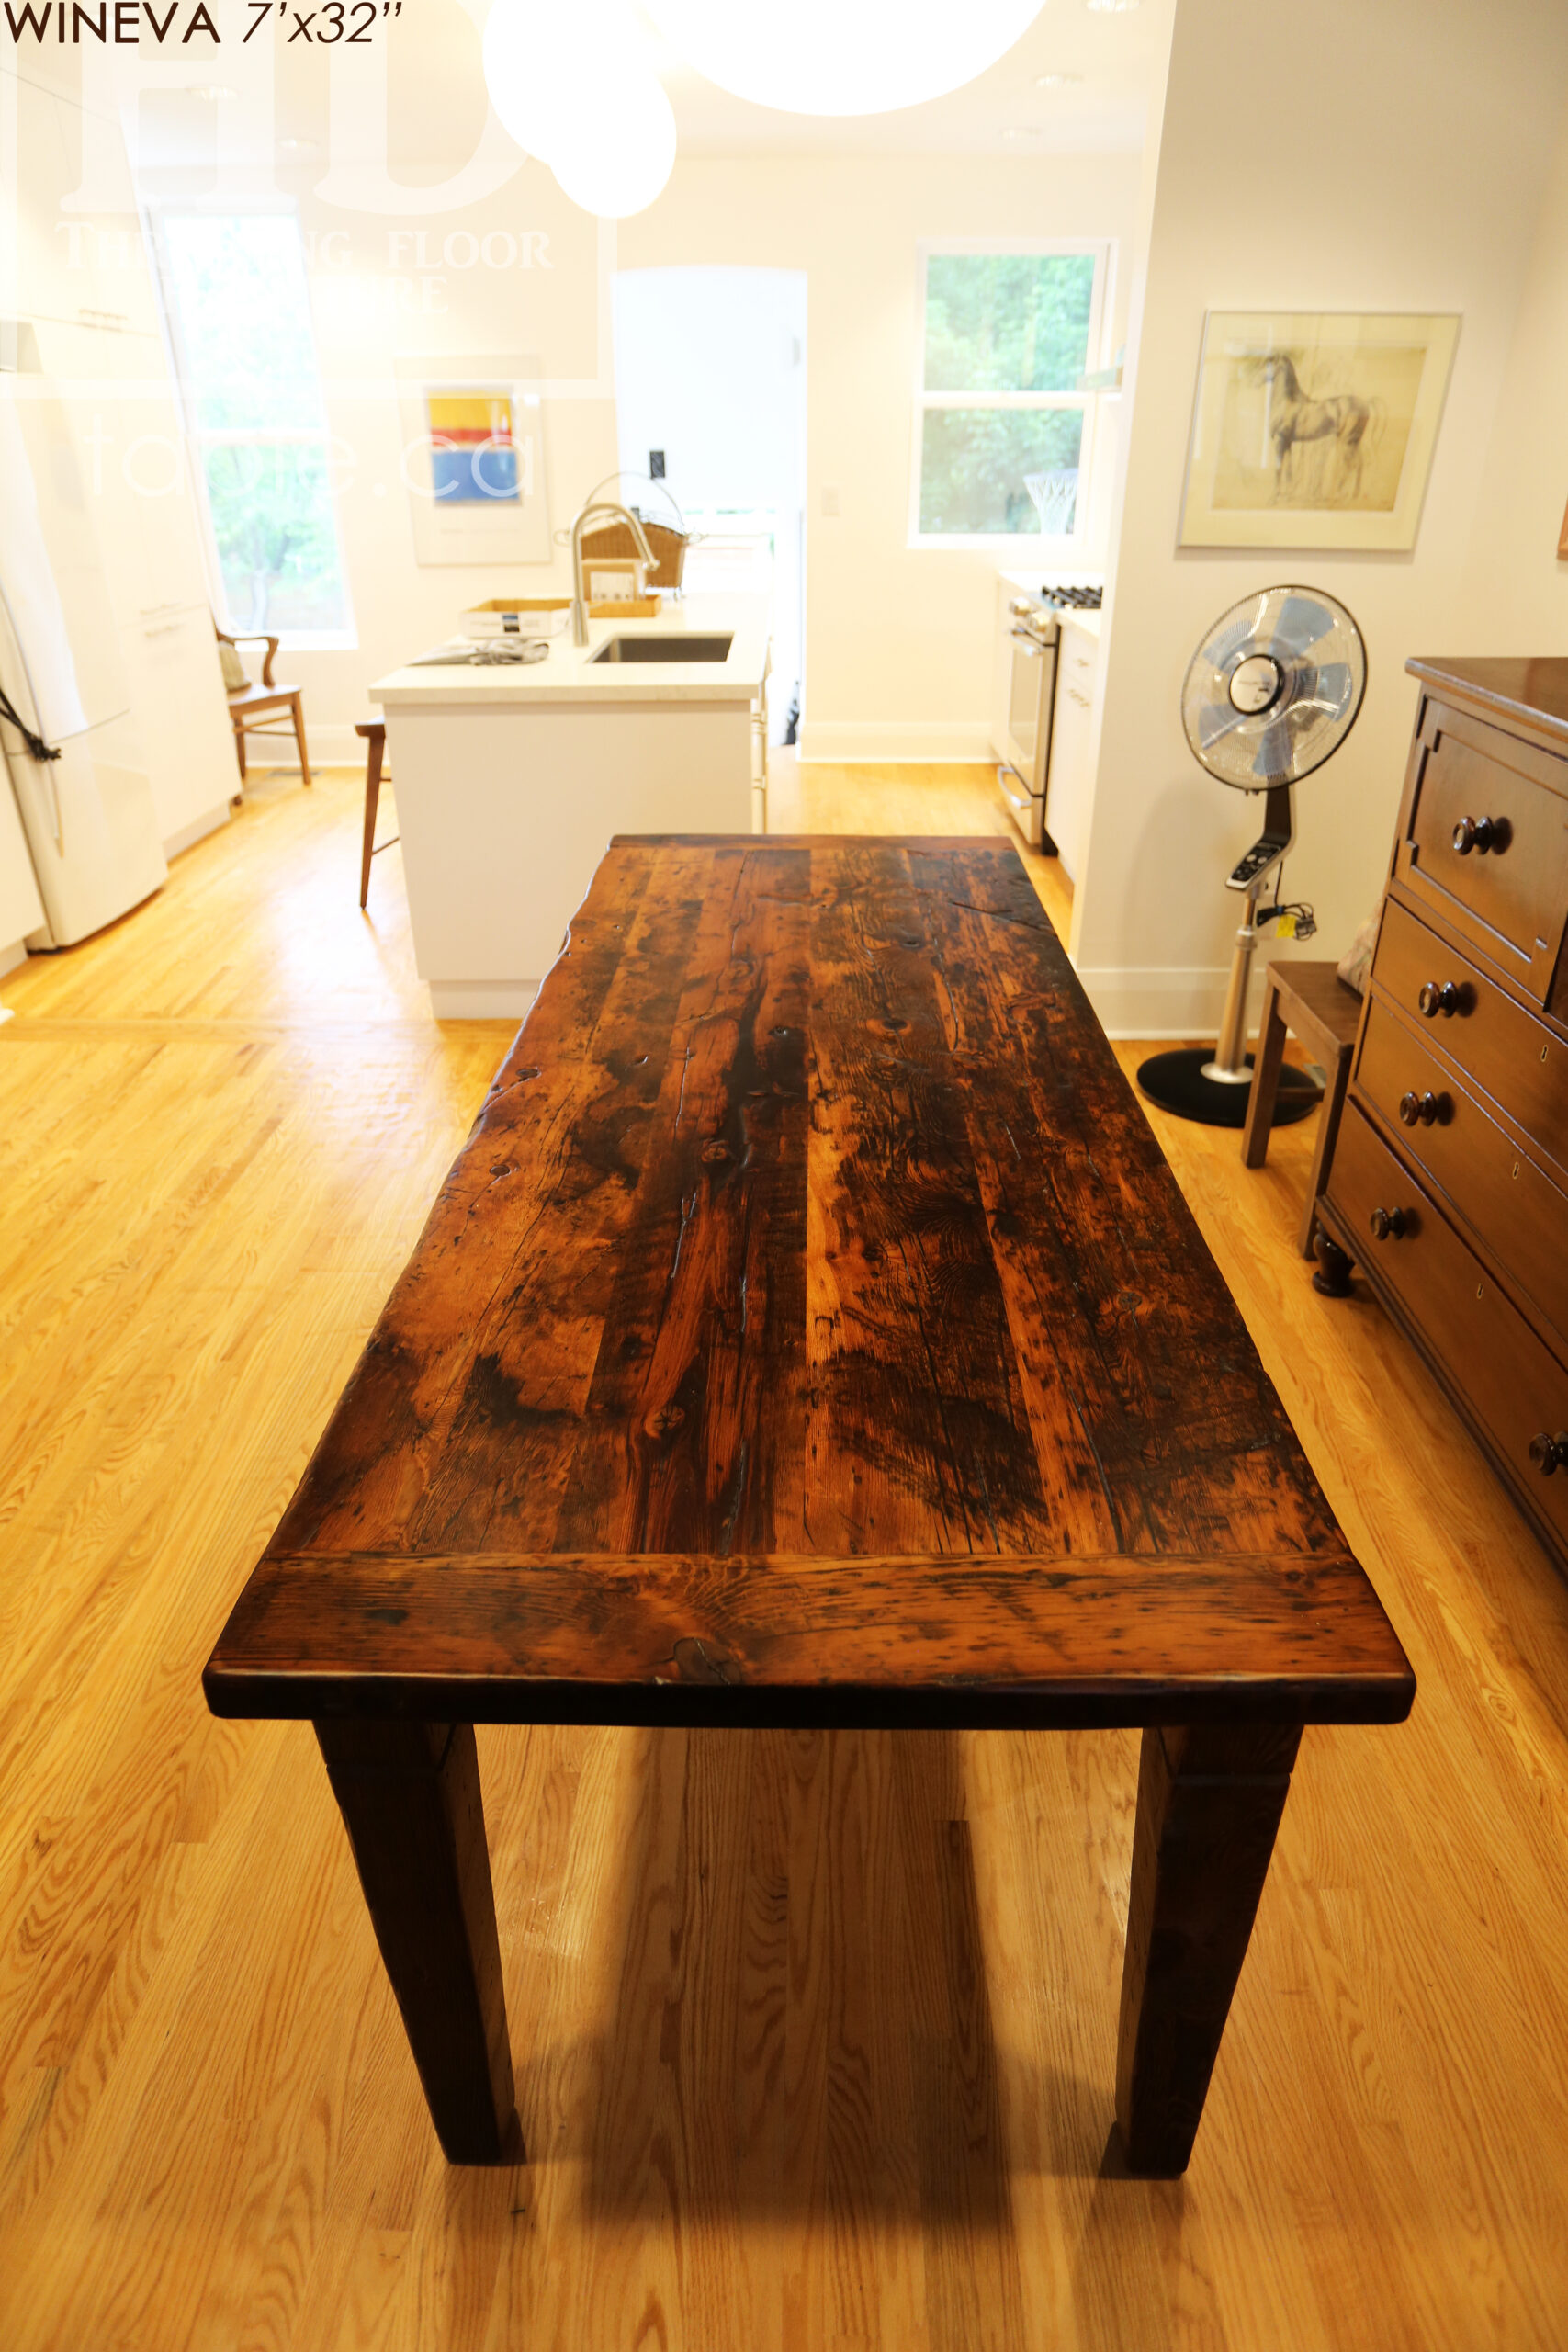 7’ Reclaimed Ontario Barnwood Table we made for a Toronto, Ontario home – 32” wide –  Harvest Base / Tapered with a Notch Windbrace Beam Legs - Old Growth Hemlock Threshing Floor Construction - Original edges & distressing maintained – Bread Edge Ends – Premium [light coating] epoxy + matte polyurethane finish - www.table.ca